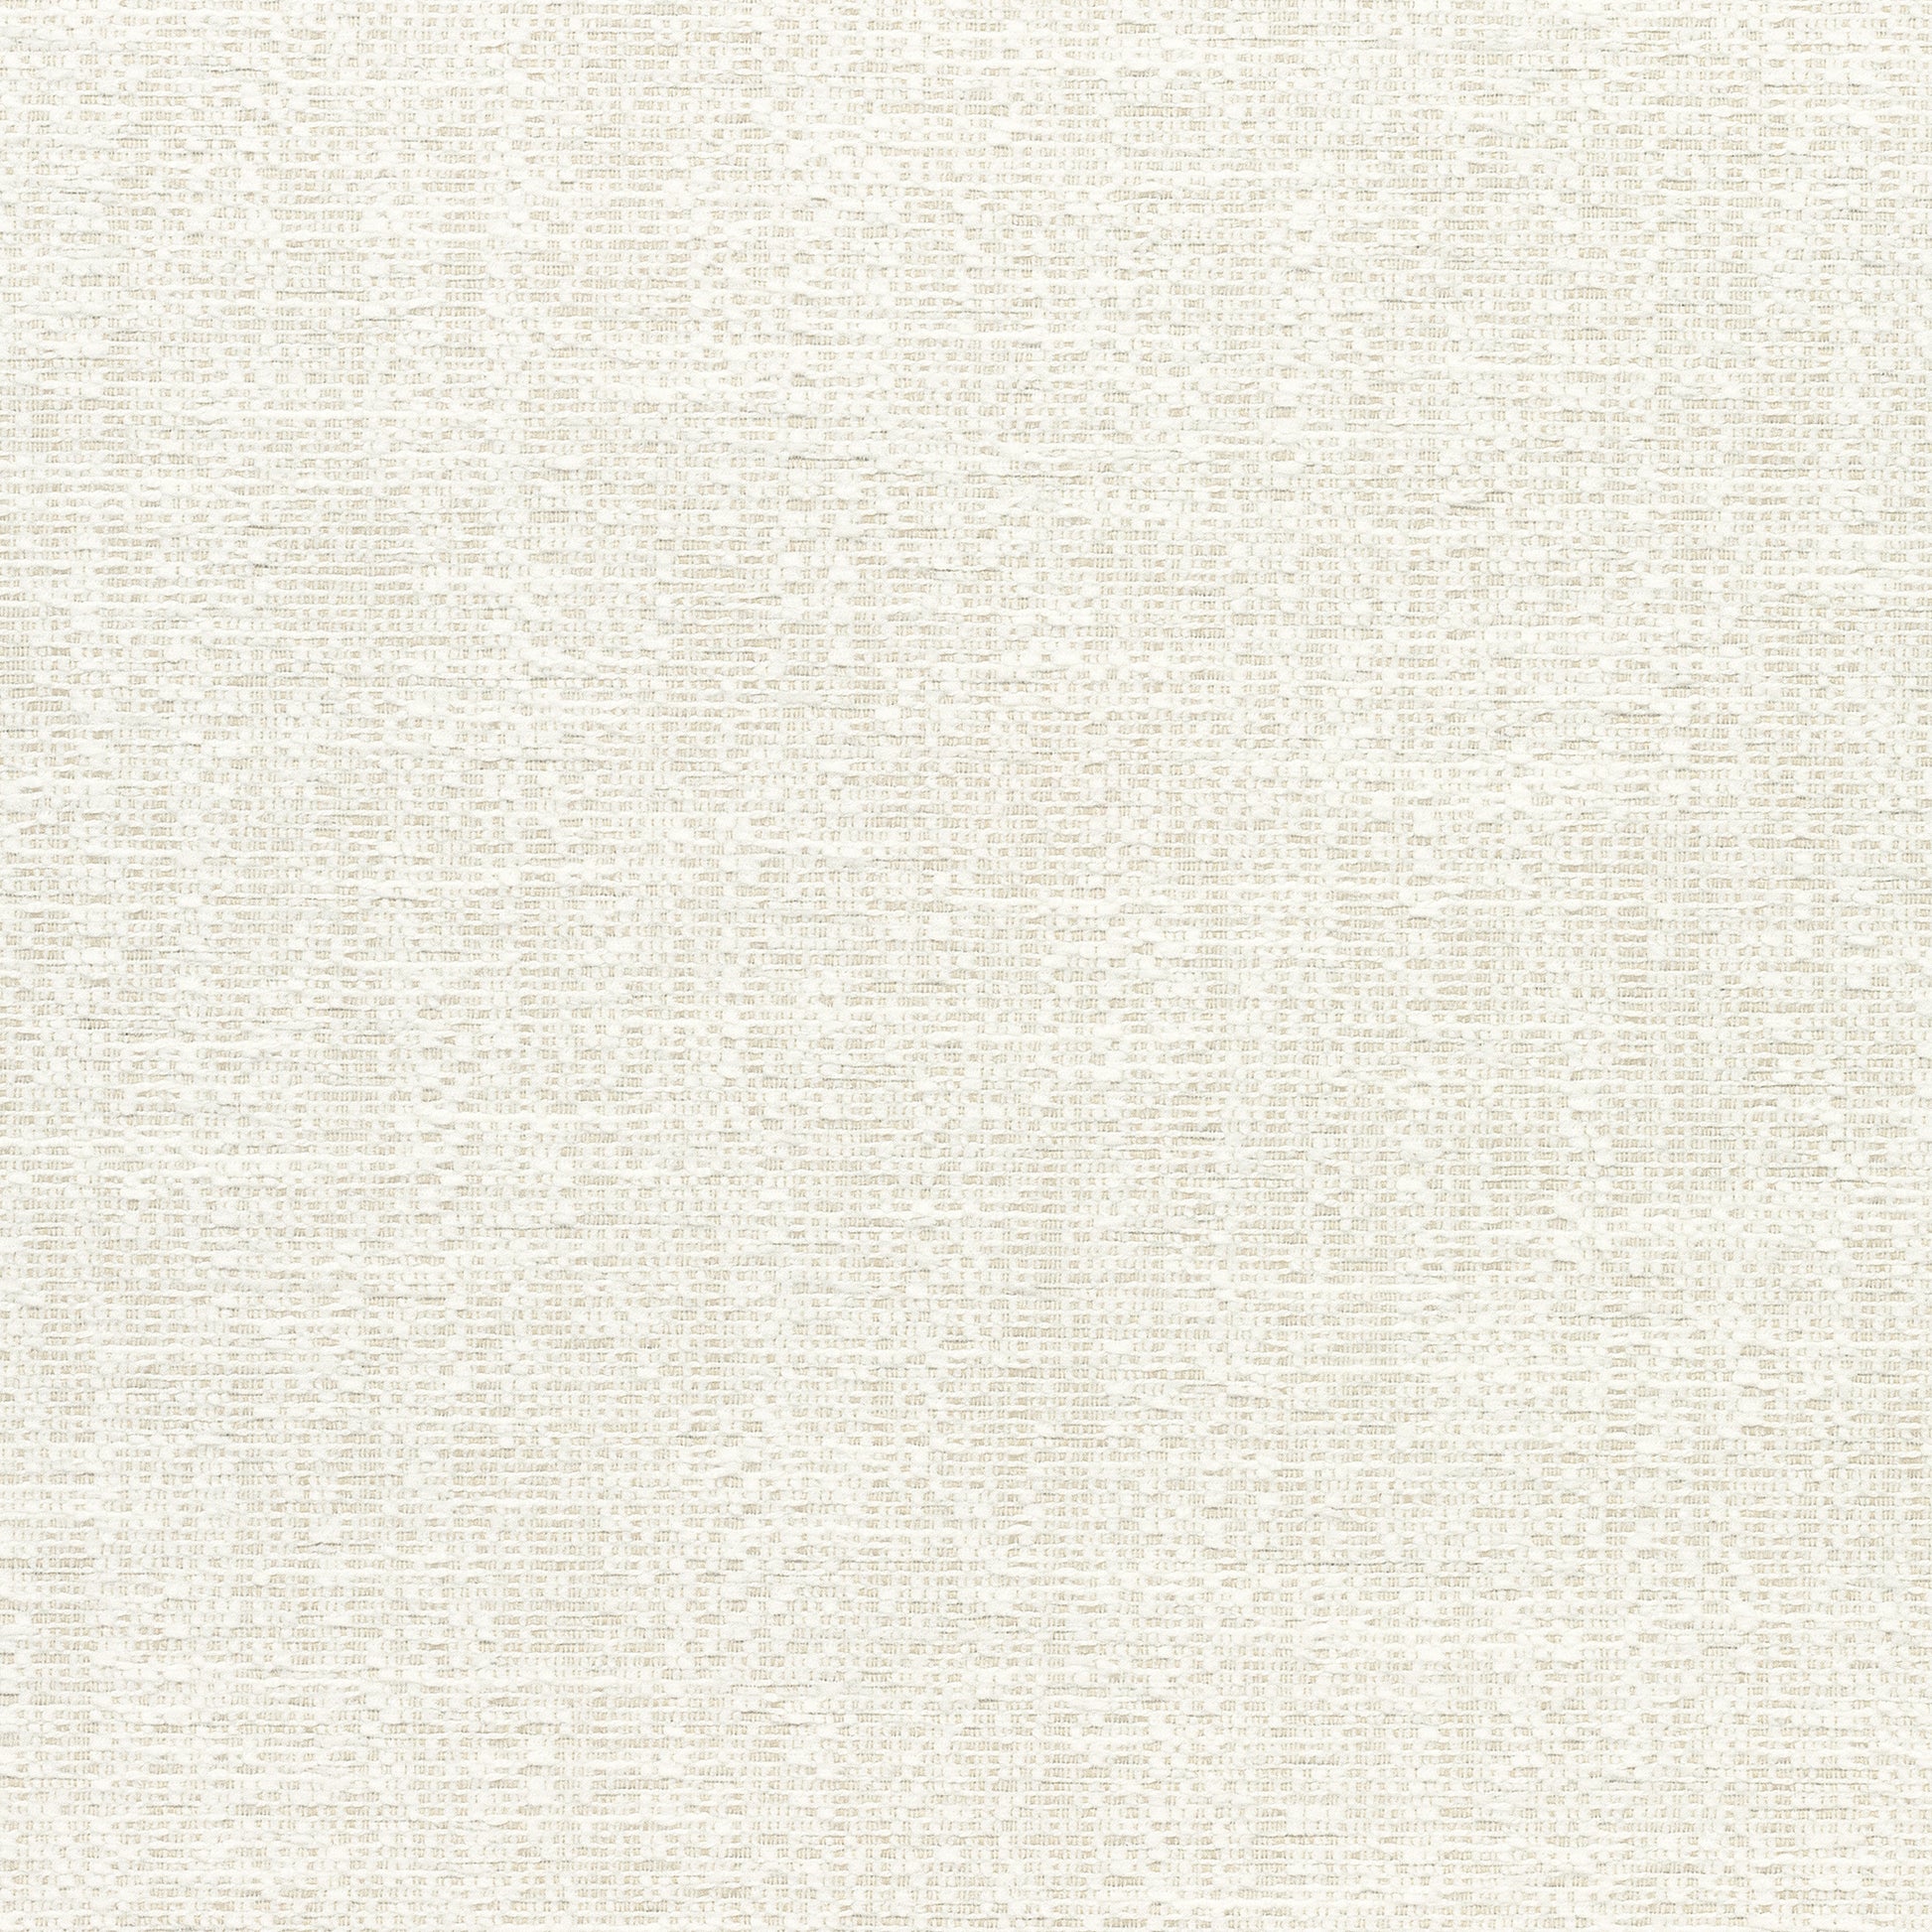 Purchase Thibaut Fabric Product# W74617 pattern name Freeport color Almond